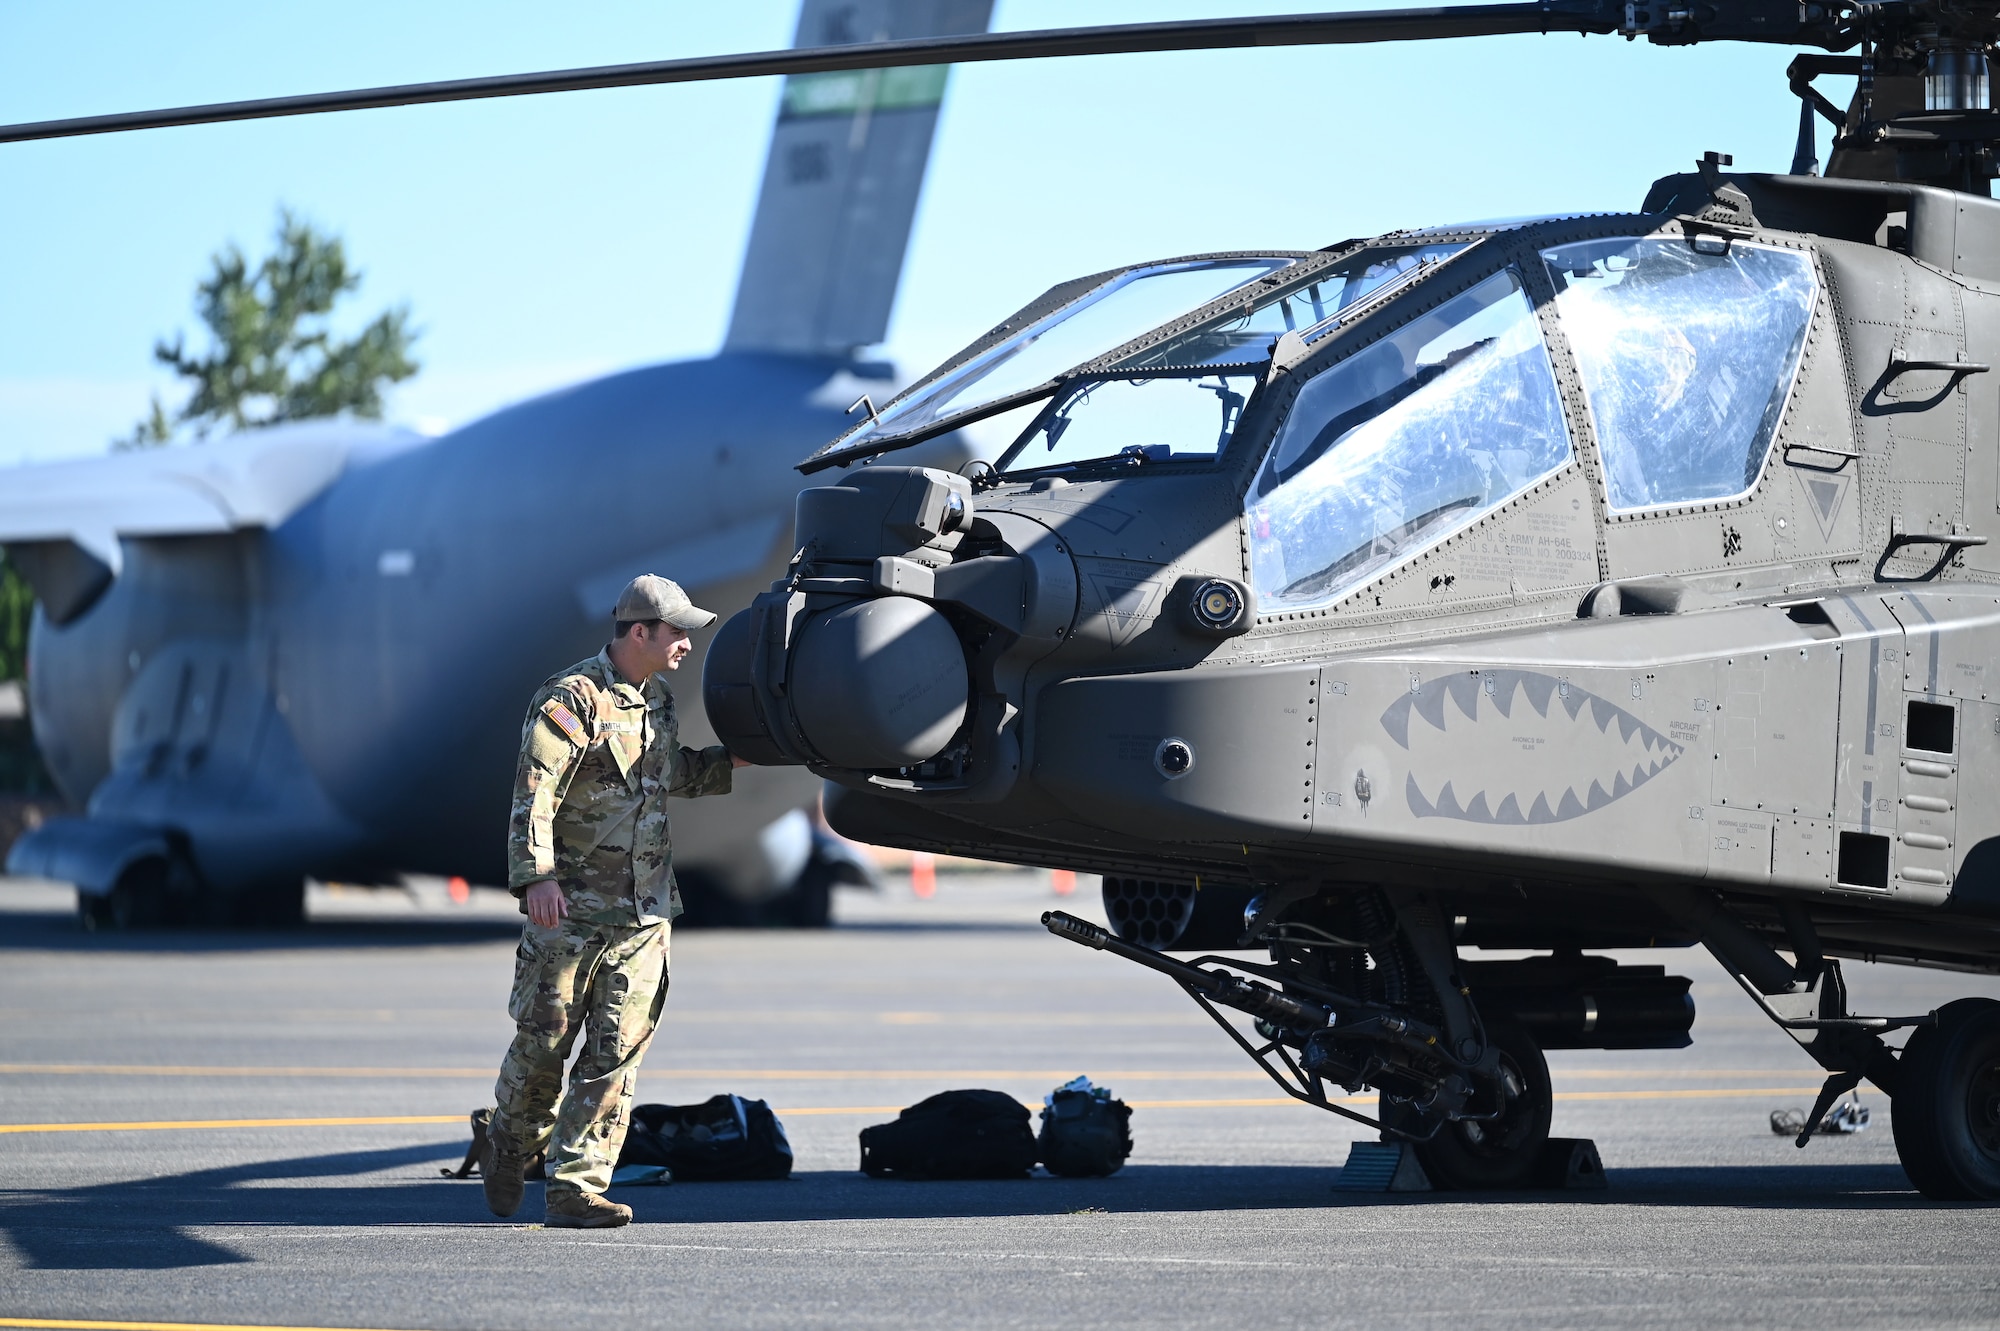 U.S. Army Chief Warrant Officer 2 George Smith, an aviation life saving equipment officer with the 1st 229th Attack Battalion 16 CAB, performs post flight checks on an AH-64 Apache helicopter during set up for Joint Base Lewis-McChord’s Airshow and Warrior Expo at JBLM, Washington, July 13, 2023. The mission of the JAWE is to foster goodwill to educate and familiarize attendees with the people, mission, and equipment of the Air Force, Army, and other Armed Services while continuing to provide installation-wide mission support. (U.S. Air Force photo by Senior Airman Colleen Anthony)